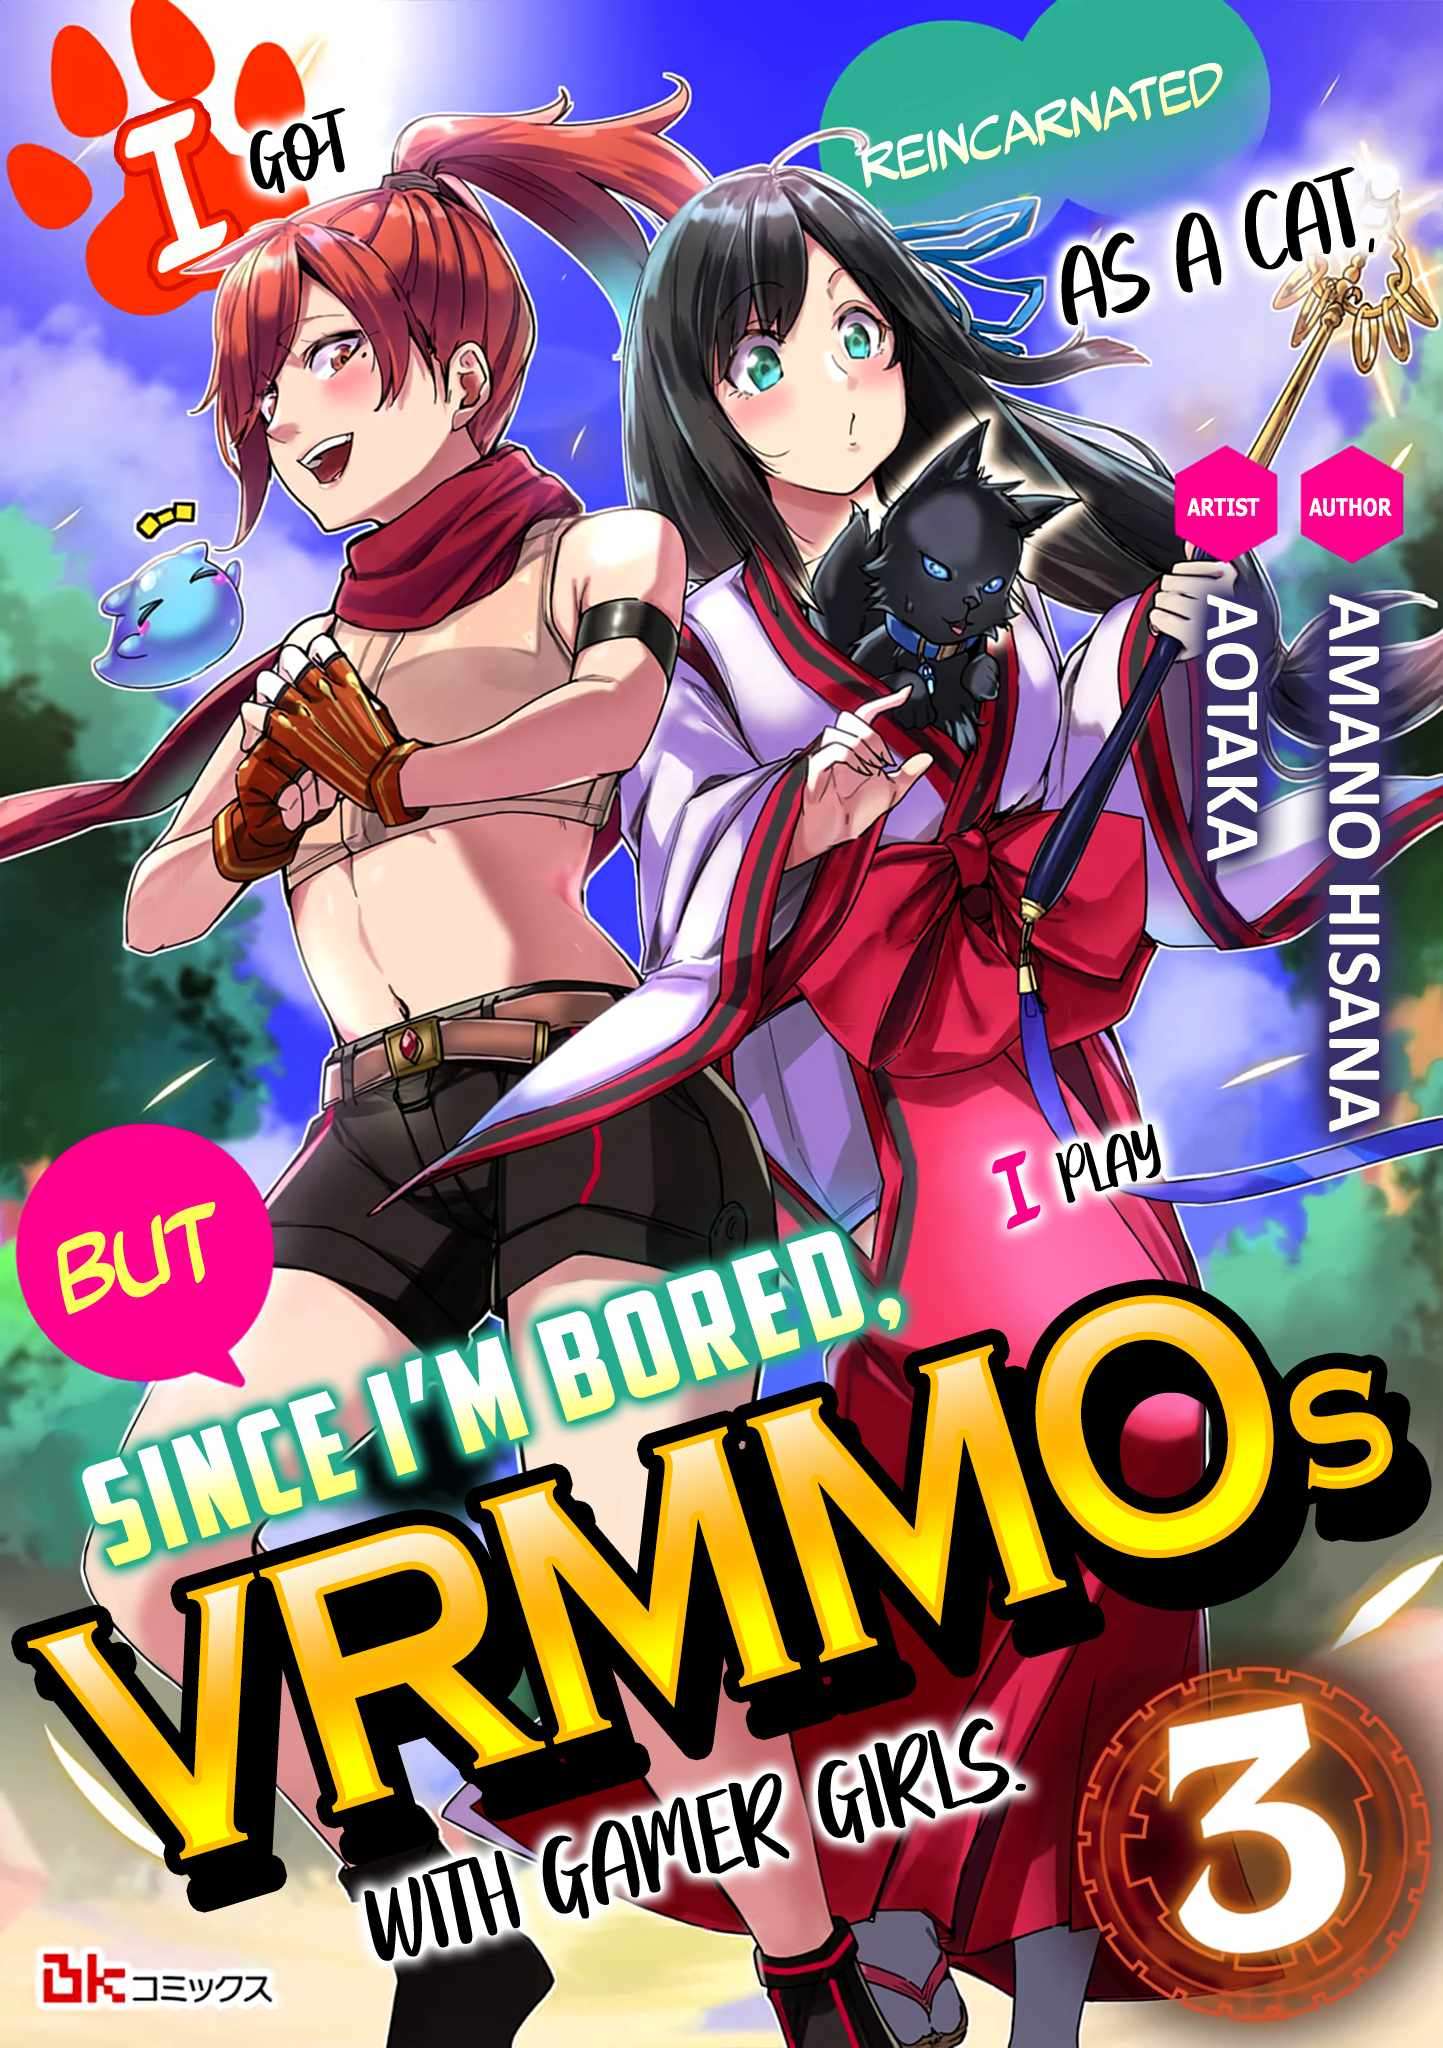 I Got Reincarnated as a Cat, but Since I’m Bored, I Play VRMMOs With Gamer Girls - chapter 3 - #2